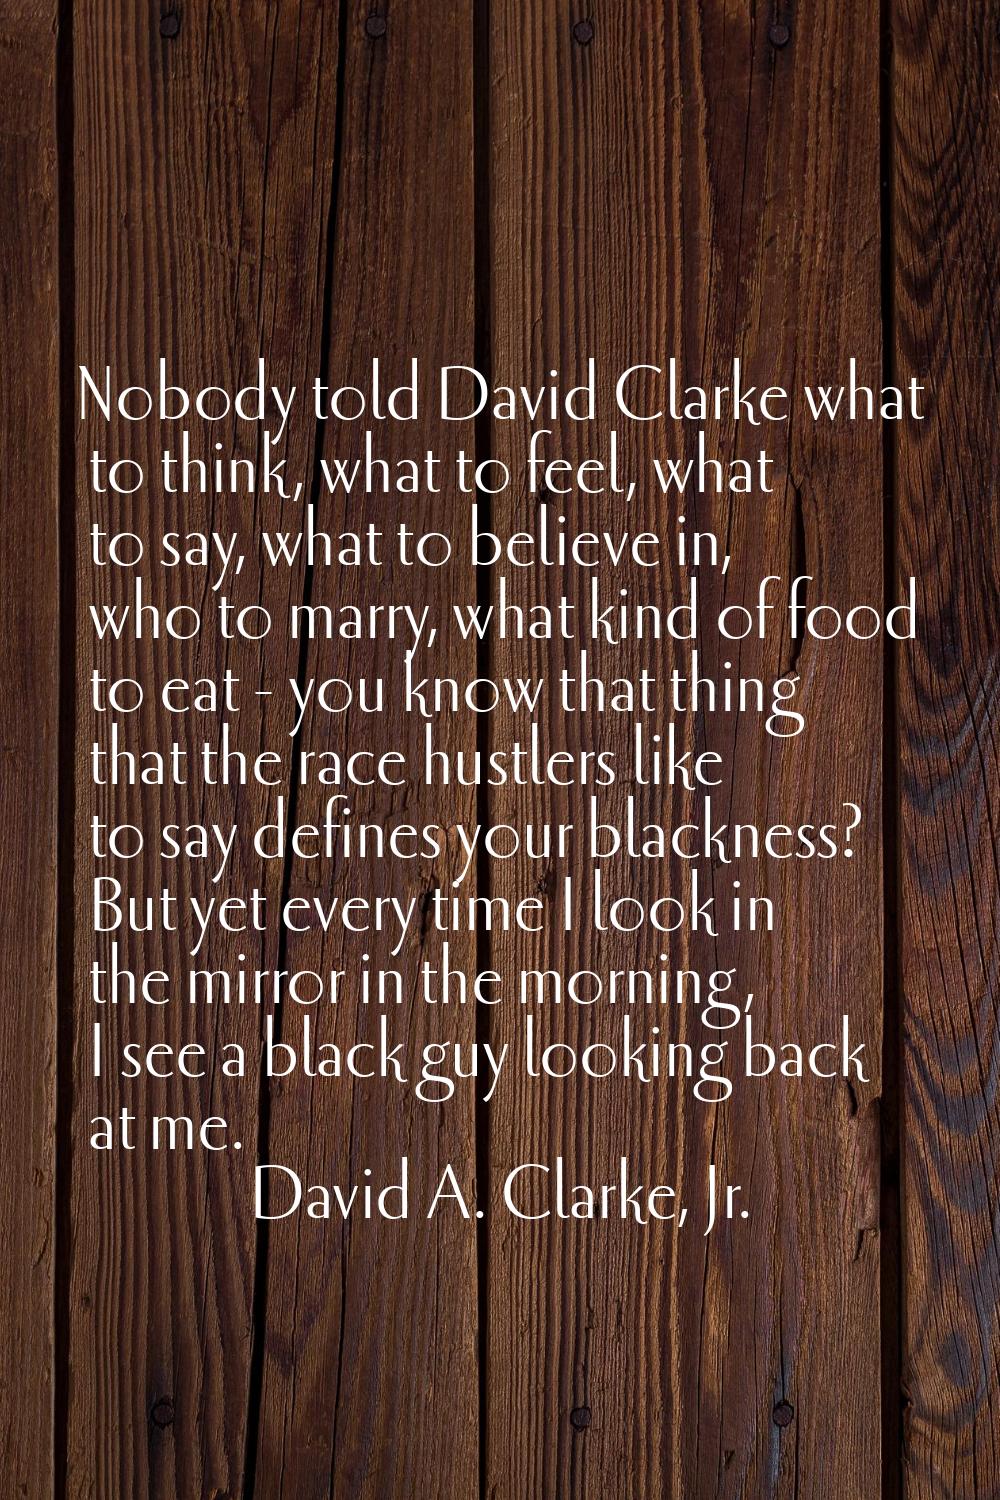 Nobody told David Clarke what to think, what to feel, what to say, what to believe in, who to marry